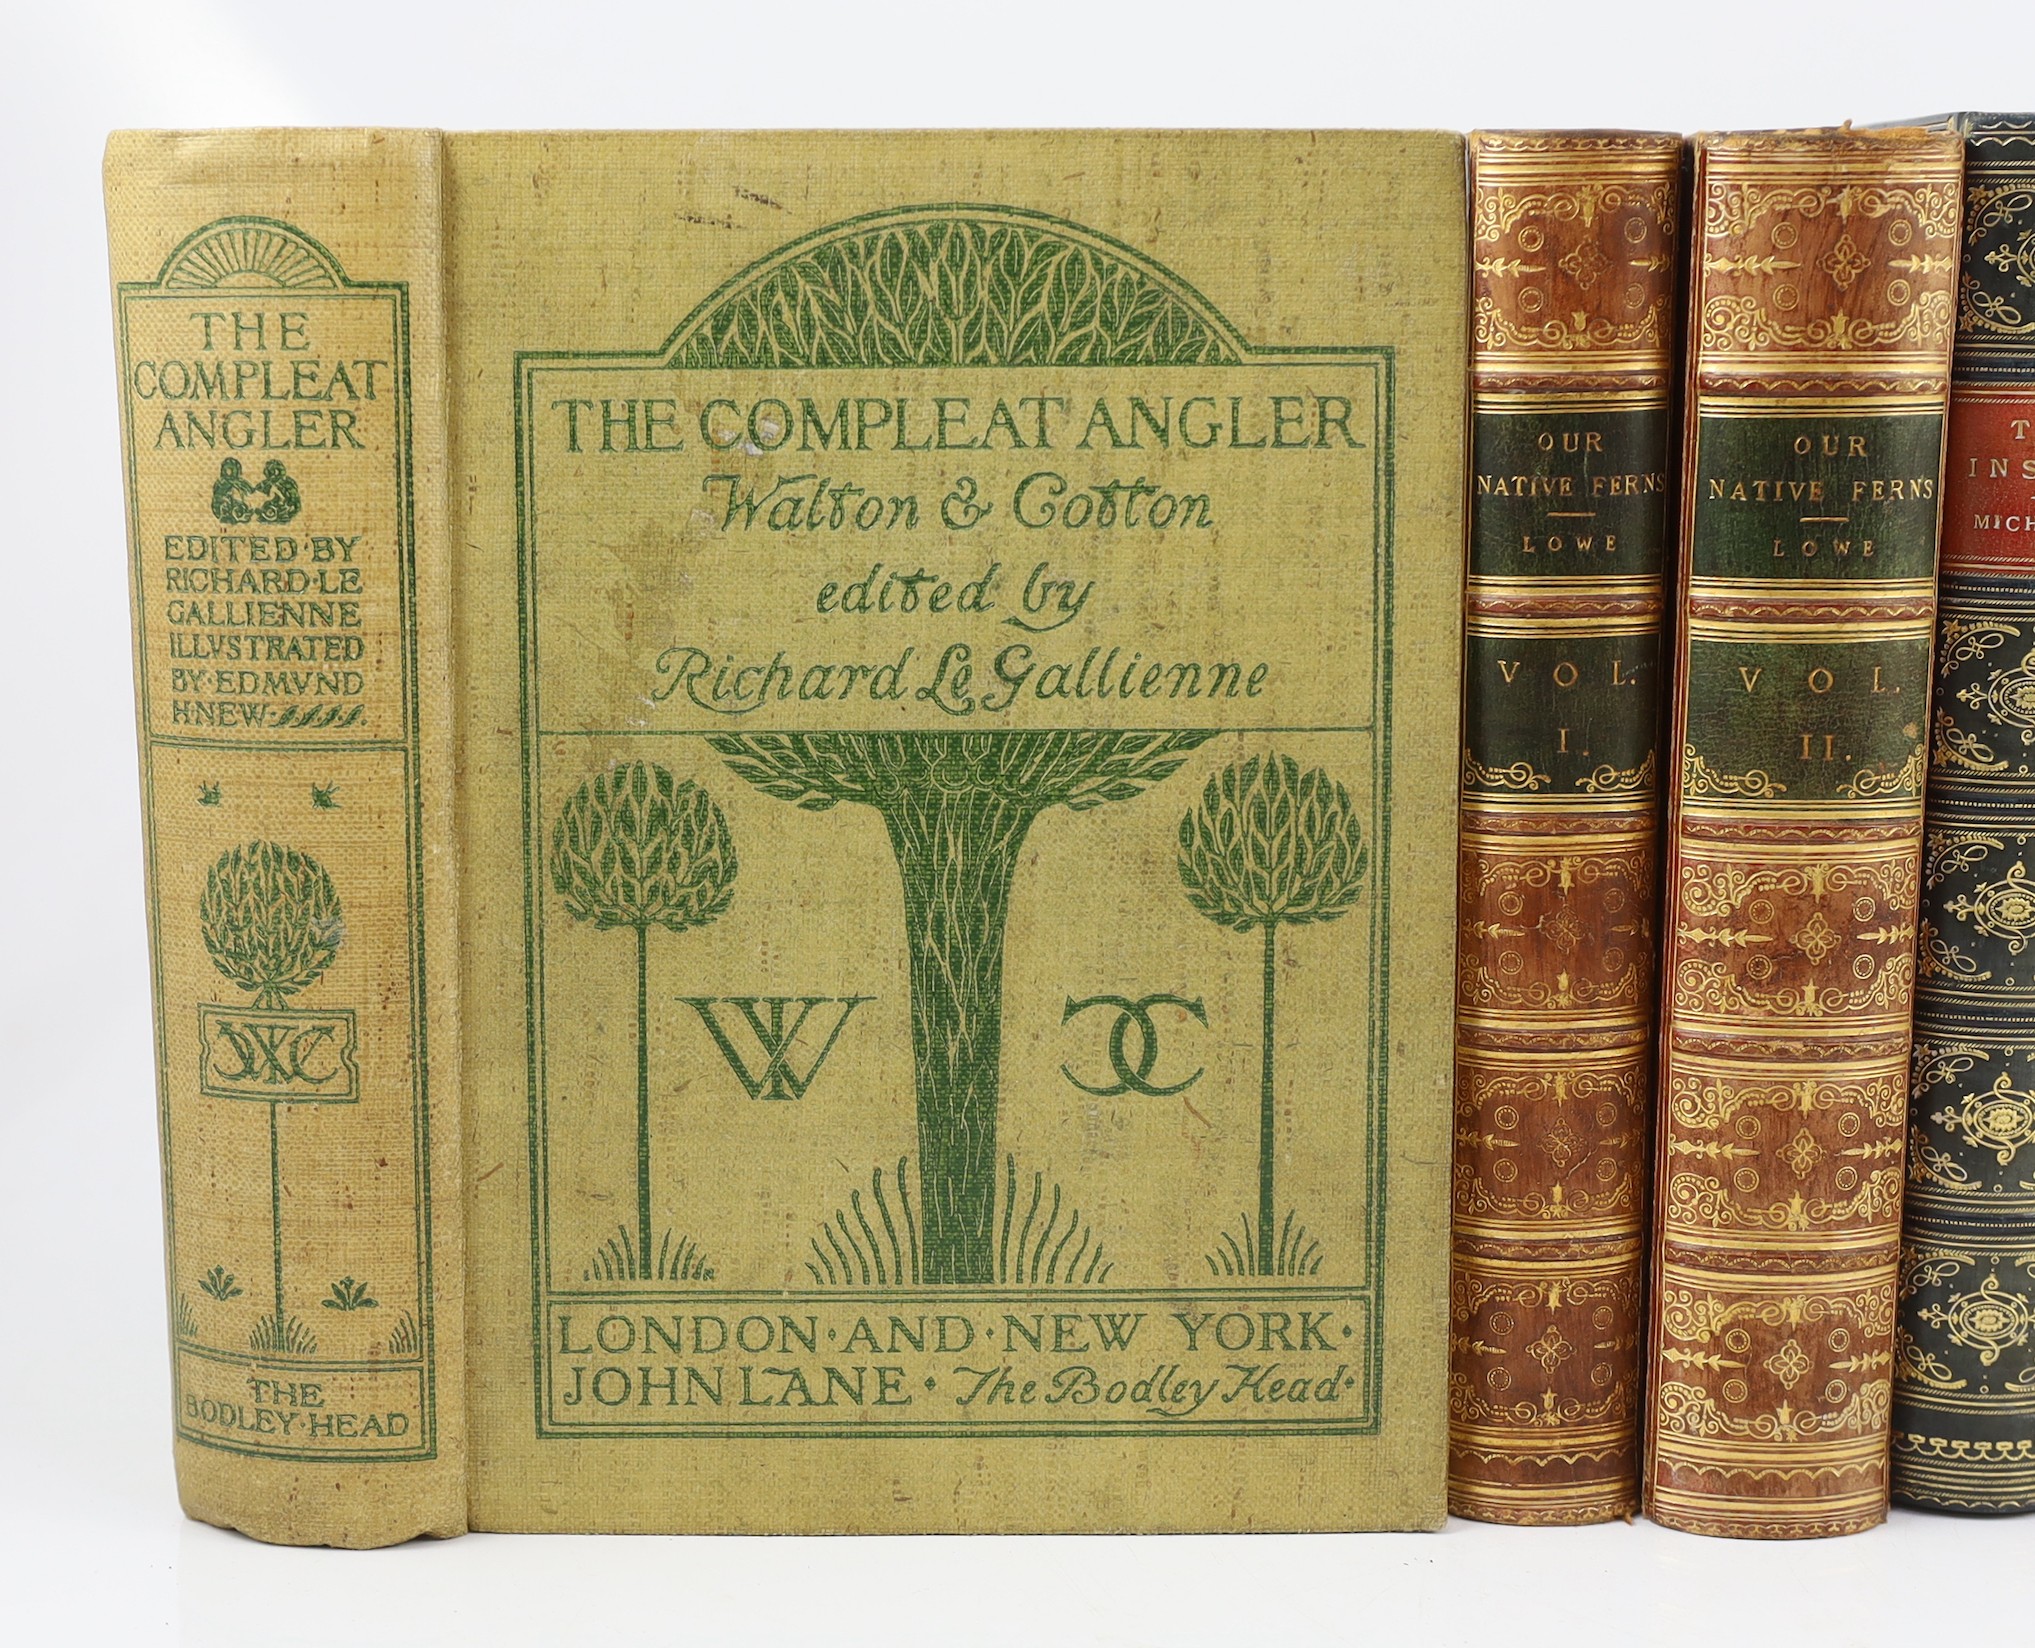 ° Wood, Rev. J.G. - The Illustrated Natural History. 3 vols. engraved illus. throughout; old gilt-decorated red half calf and marbled boards, panelled spines with green labels, roy.8vo. (?1860) - 63